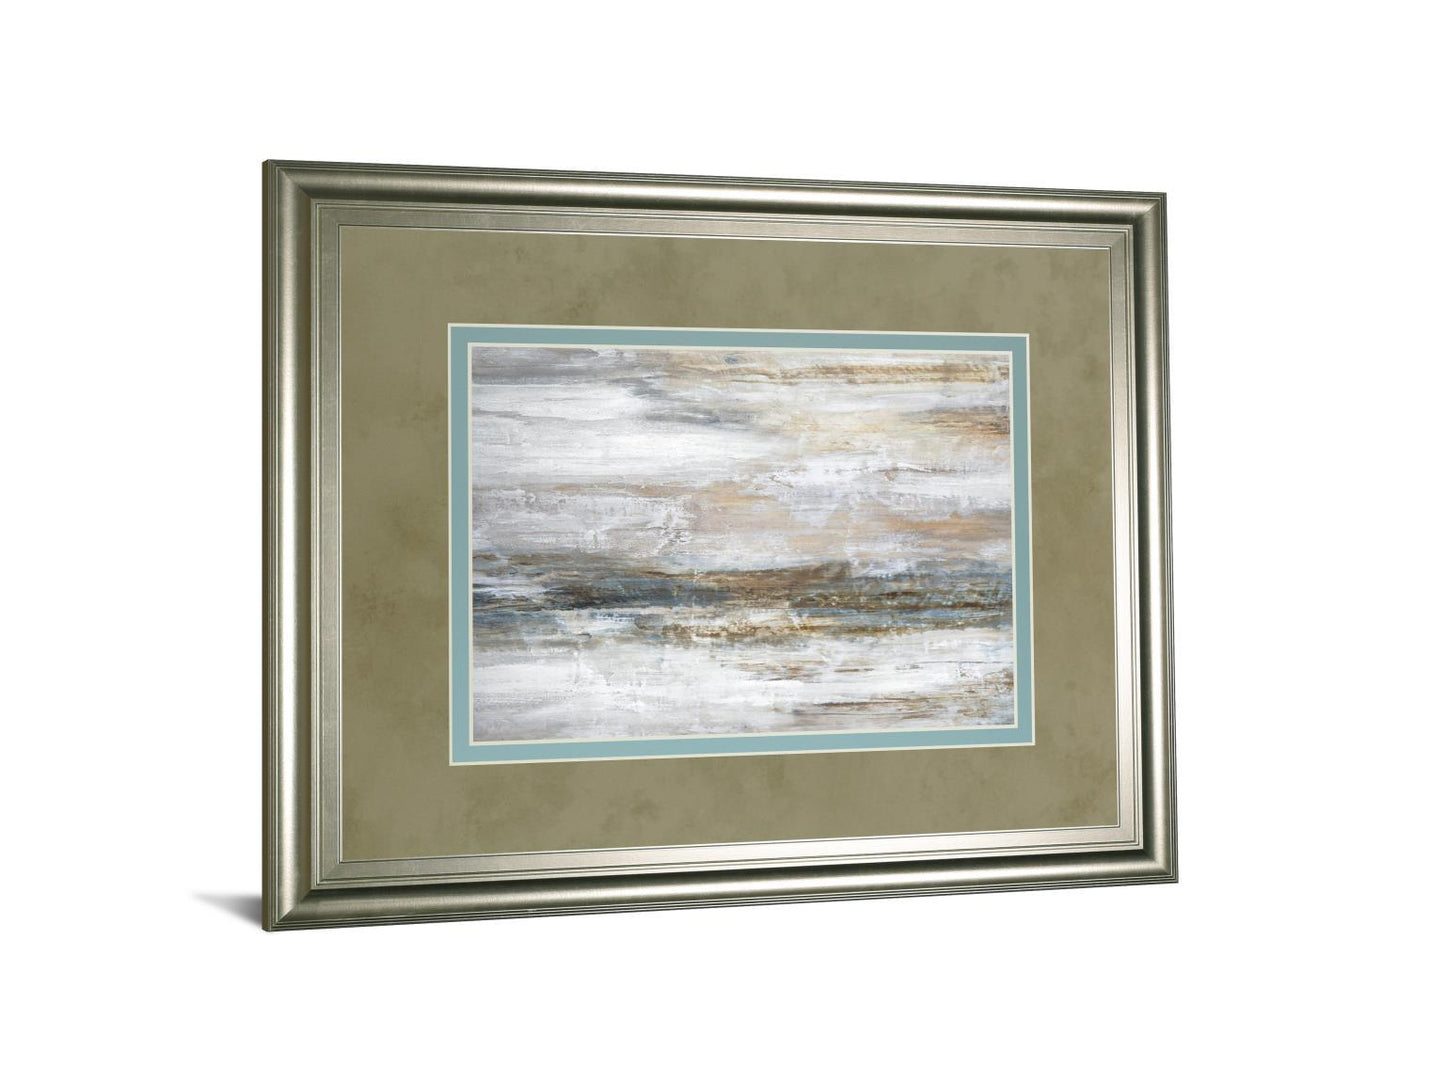 Mirage I By Fontaine, S. - Framed Print Wall Art - Dark Gray